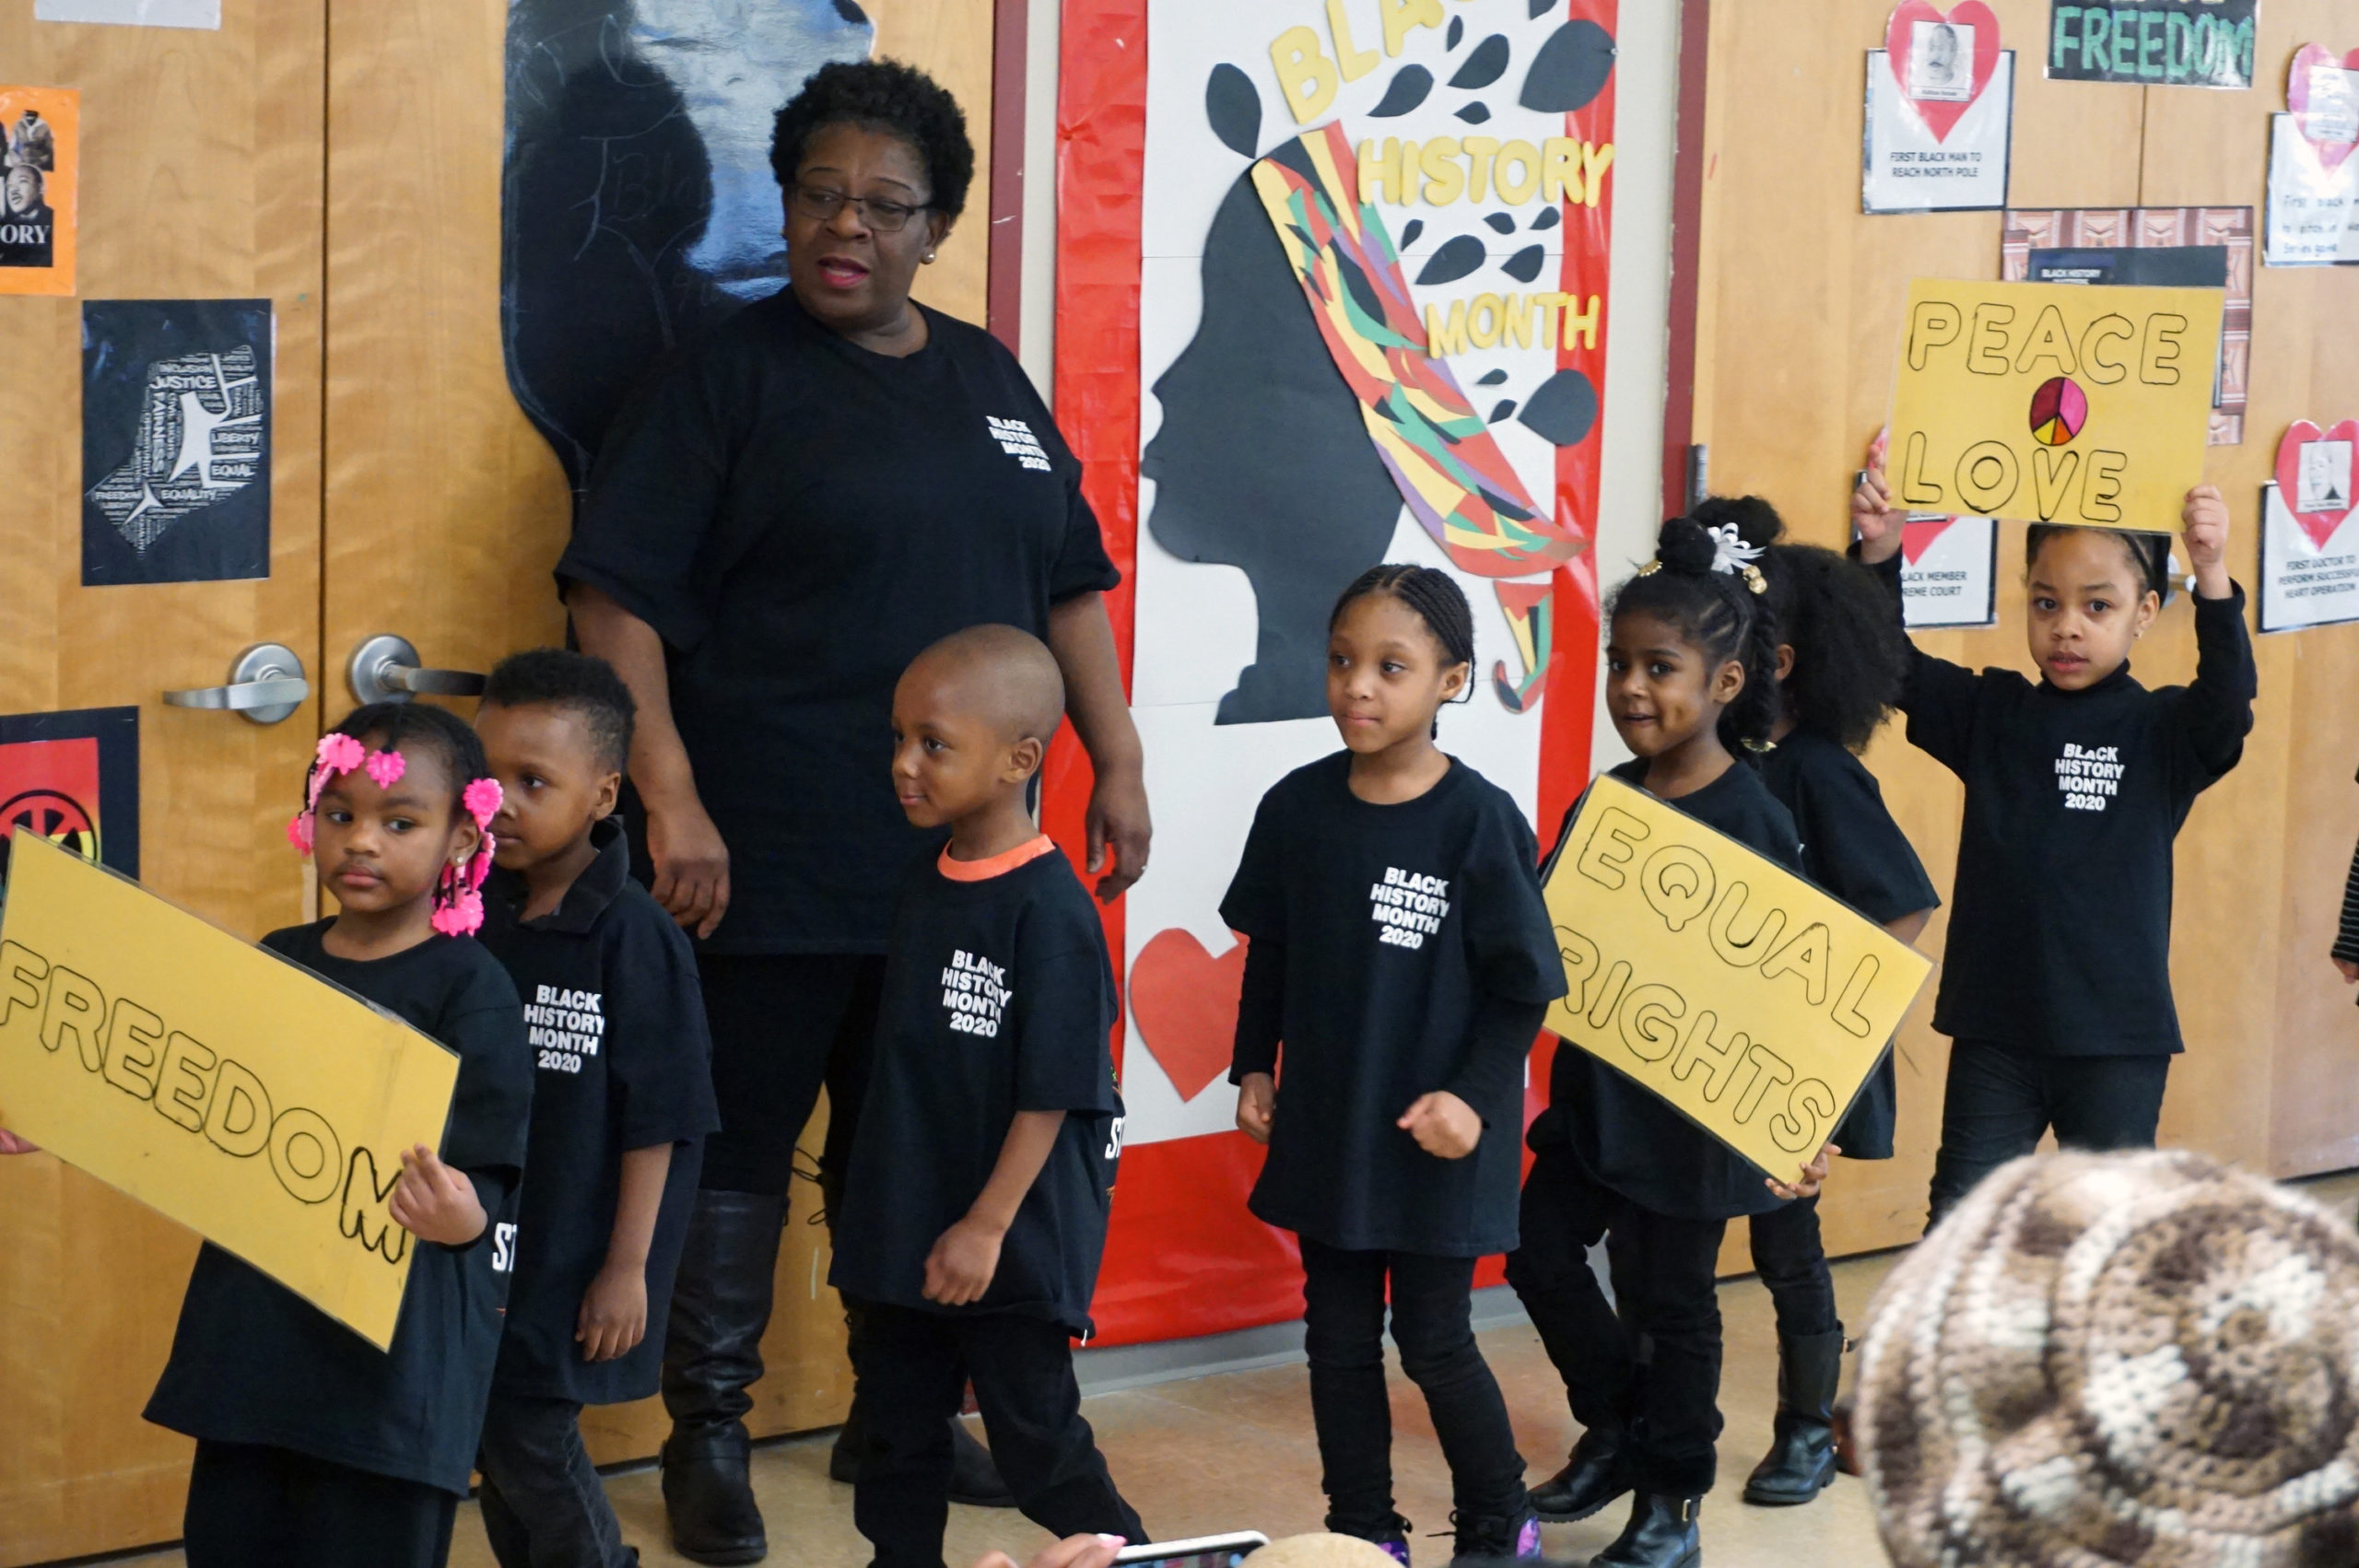 CHELC Black History Month Celebration Class with Shirts and Signs